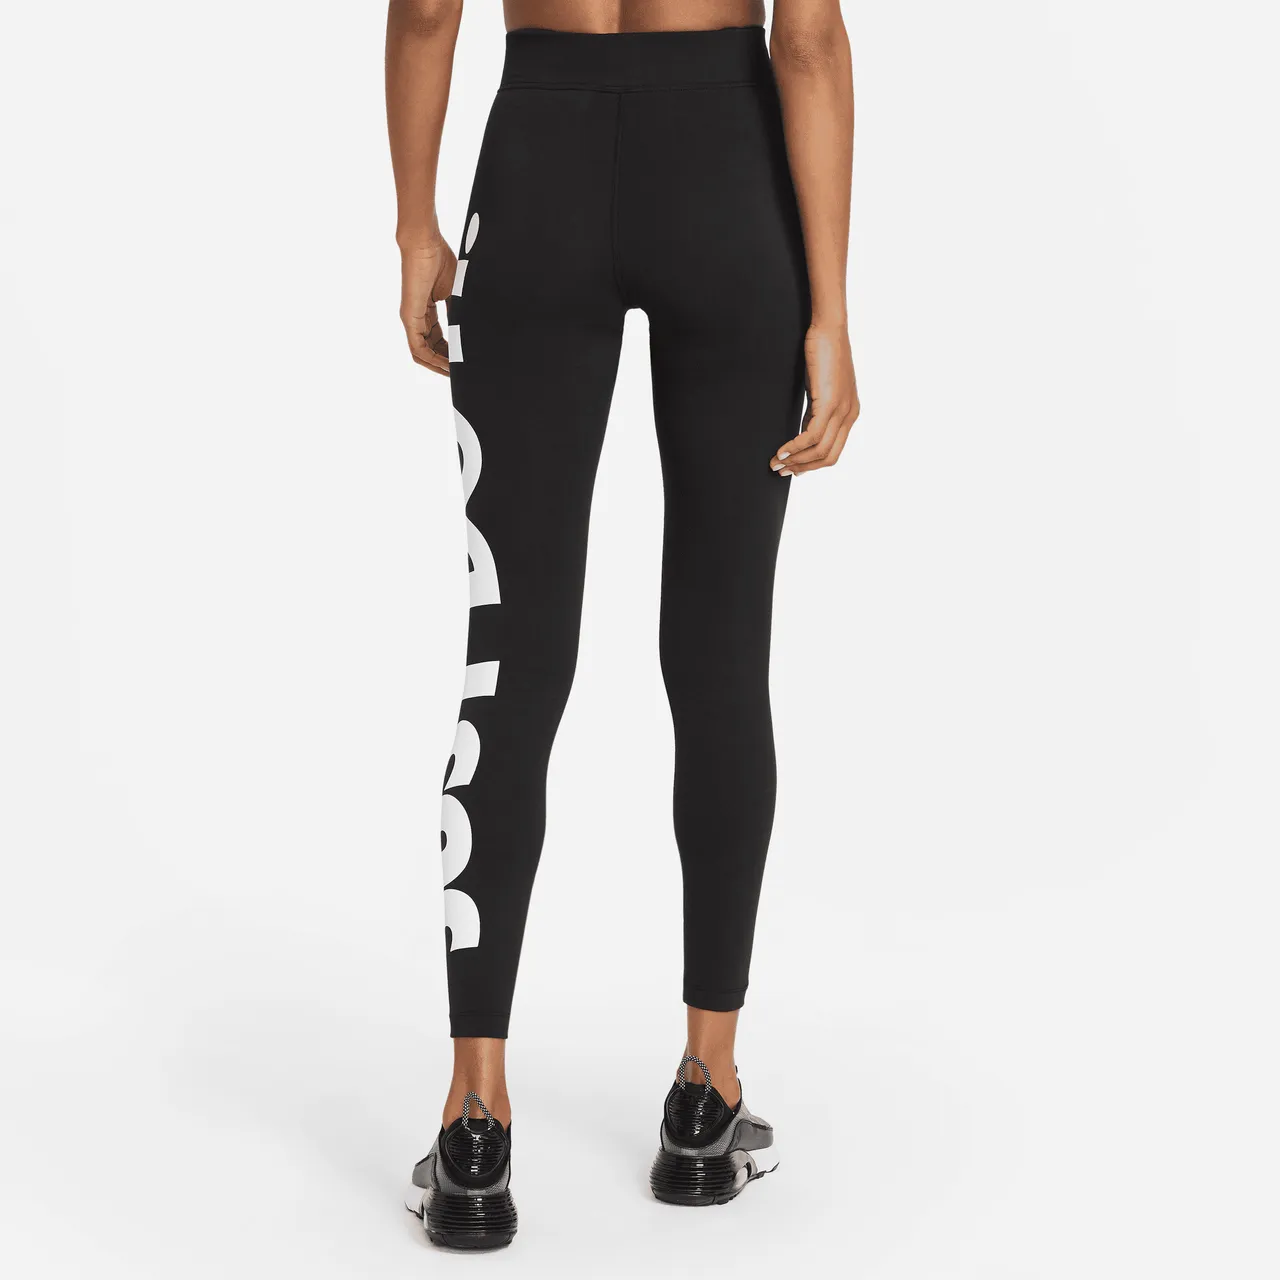 Nike Sportswear Essential Women's High-Waisted Graphic Leggings - Black - Polyester